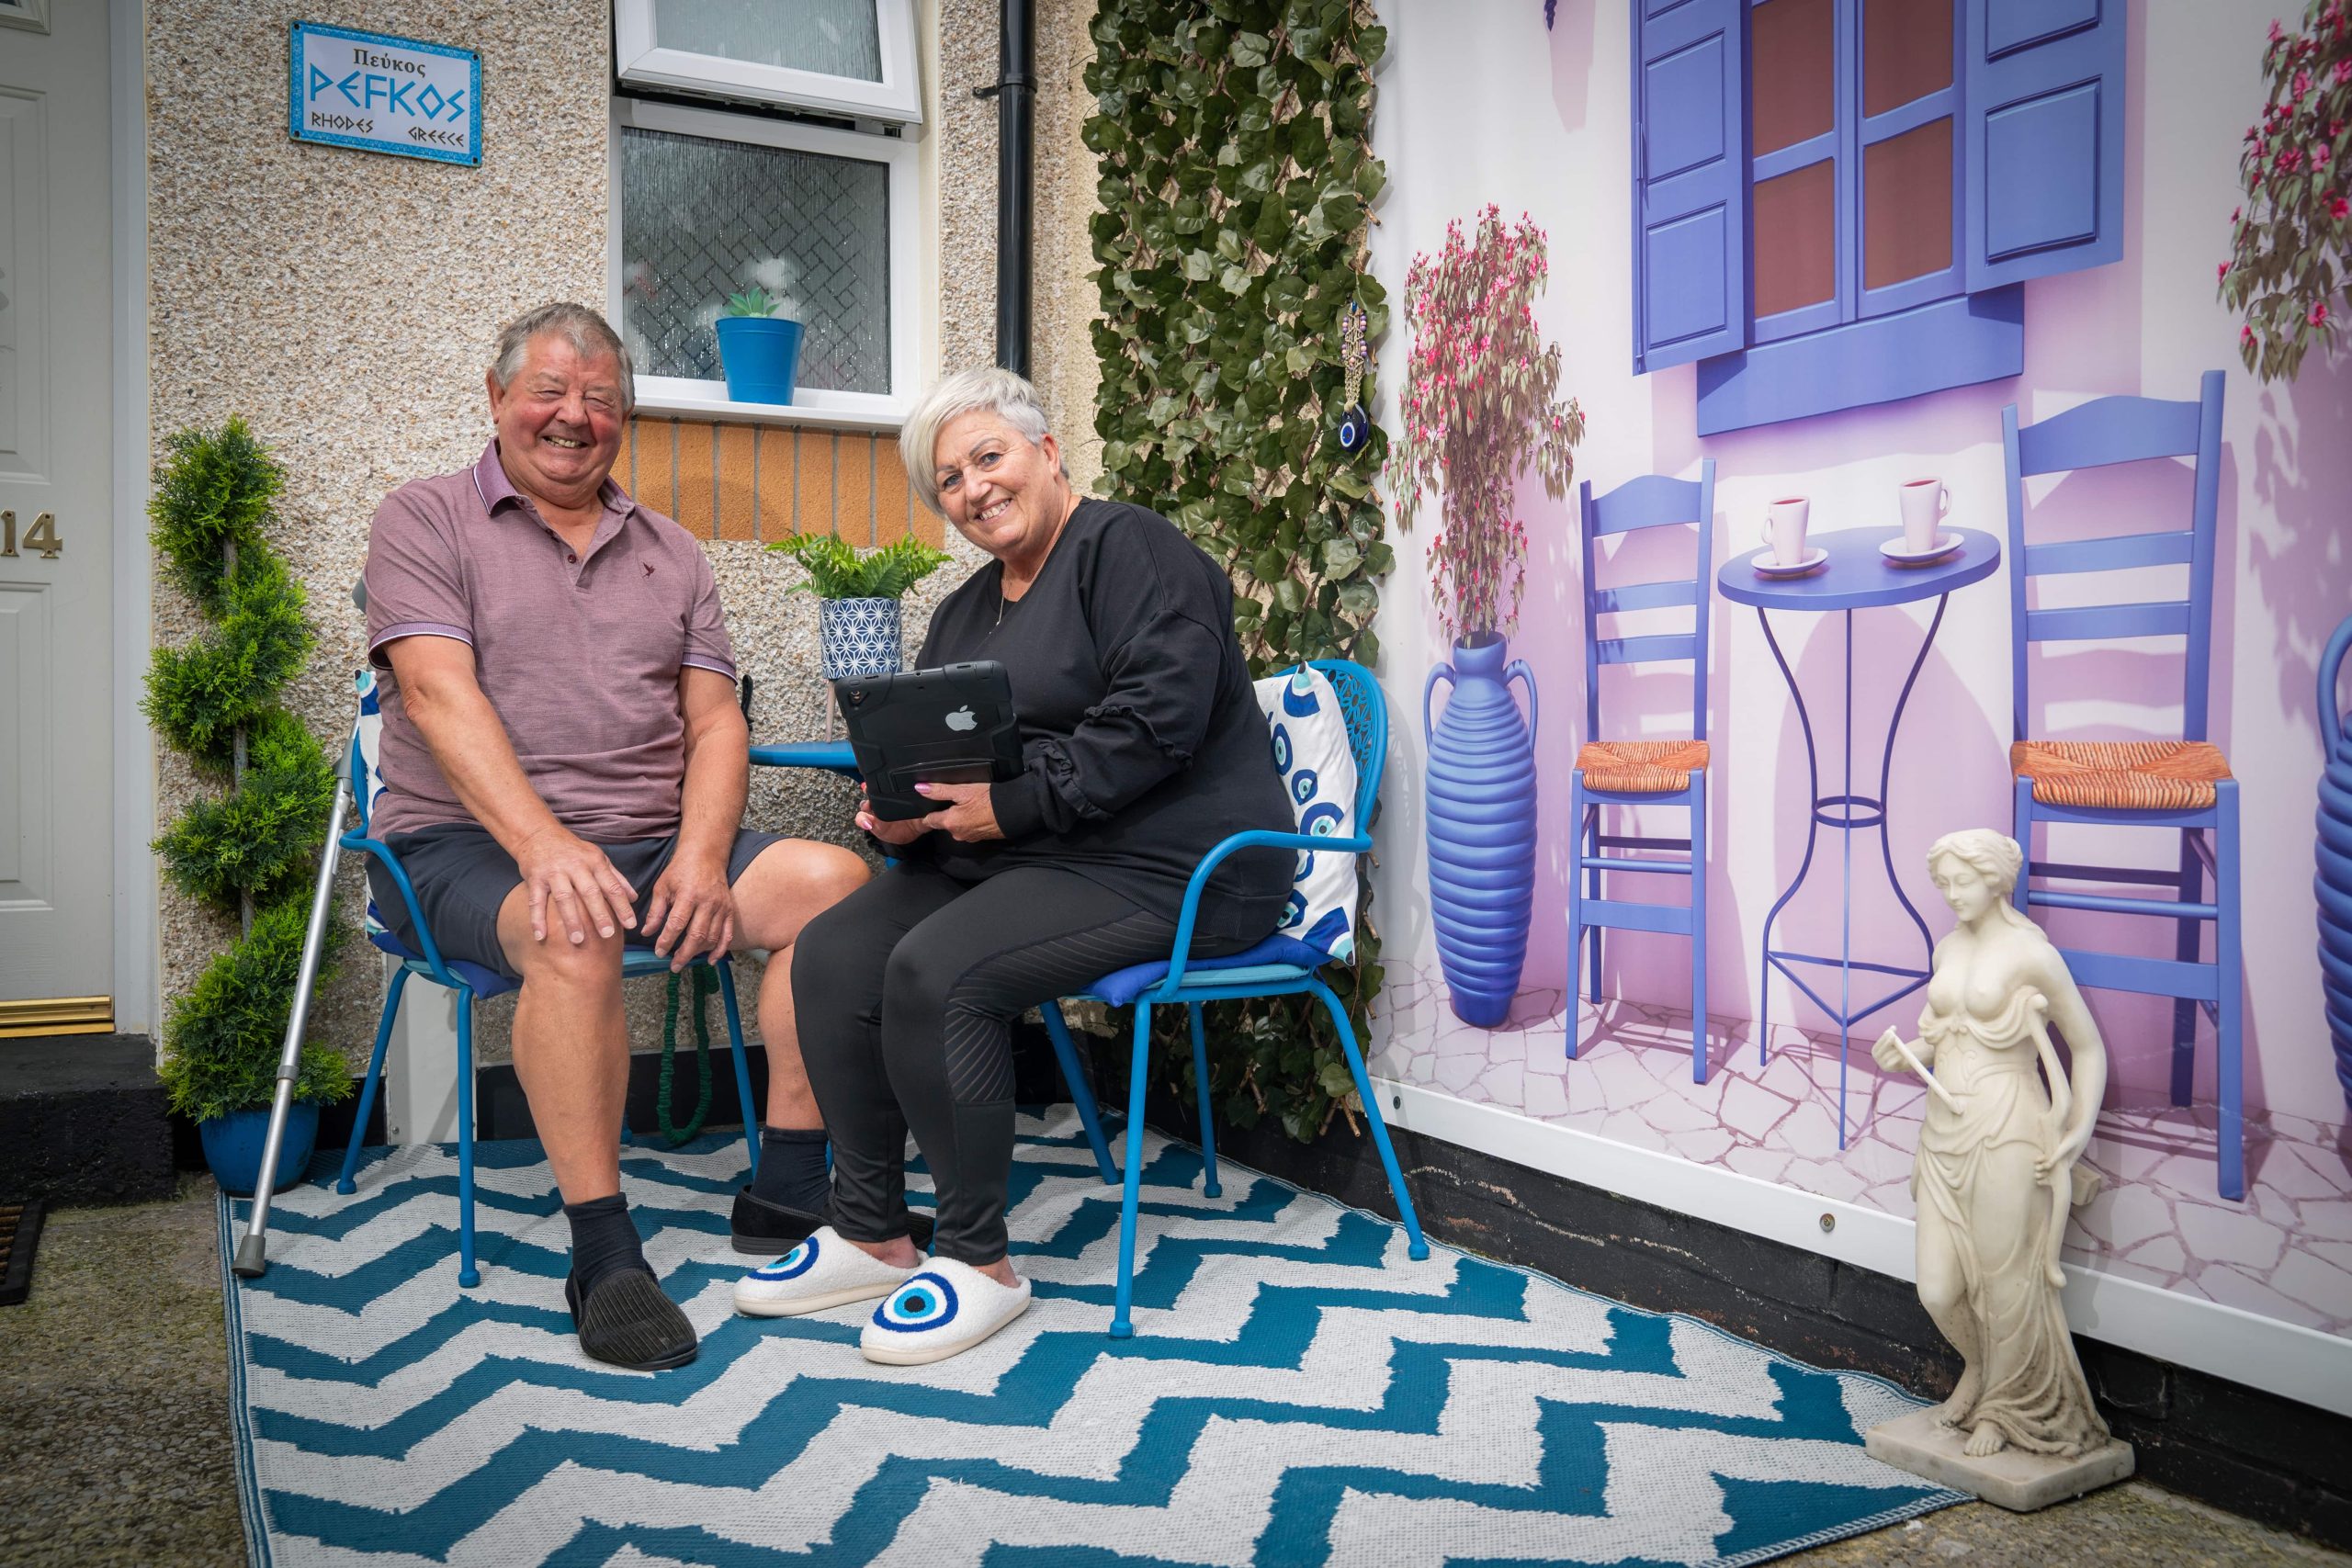 Trivallis Housing Landlord Wales A man and a woman sit outside a house with a decorative facade featuring a painted scene of a cafe, complete with a statue and a patterned rug, part of Trivallis' RCT housing